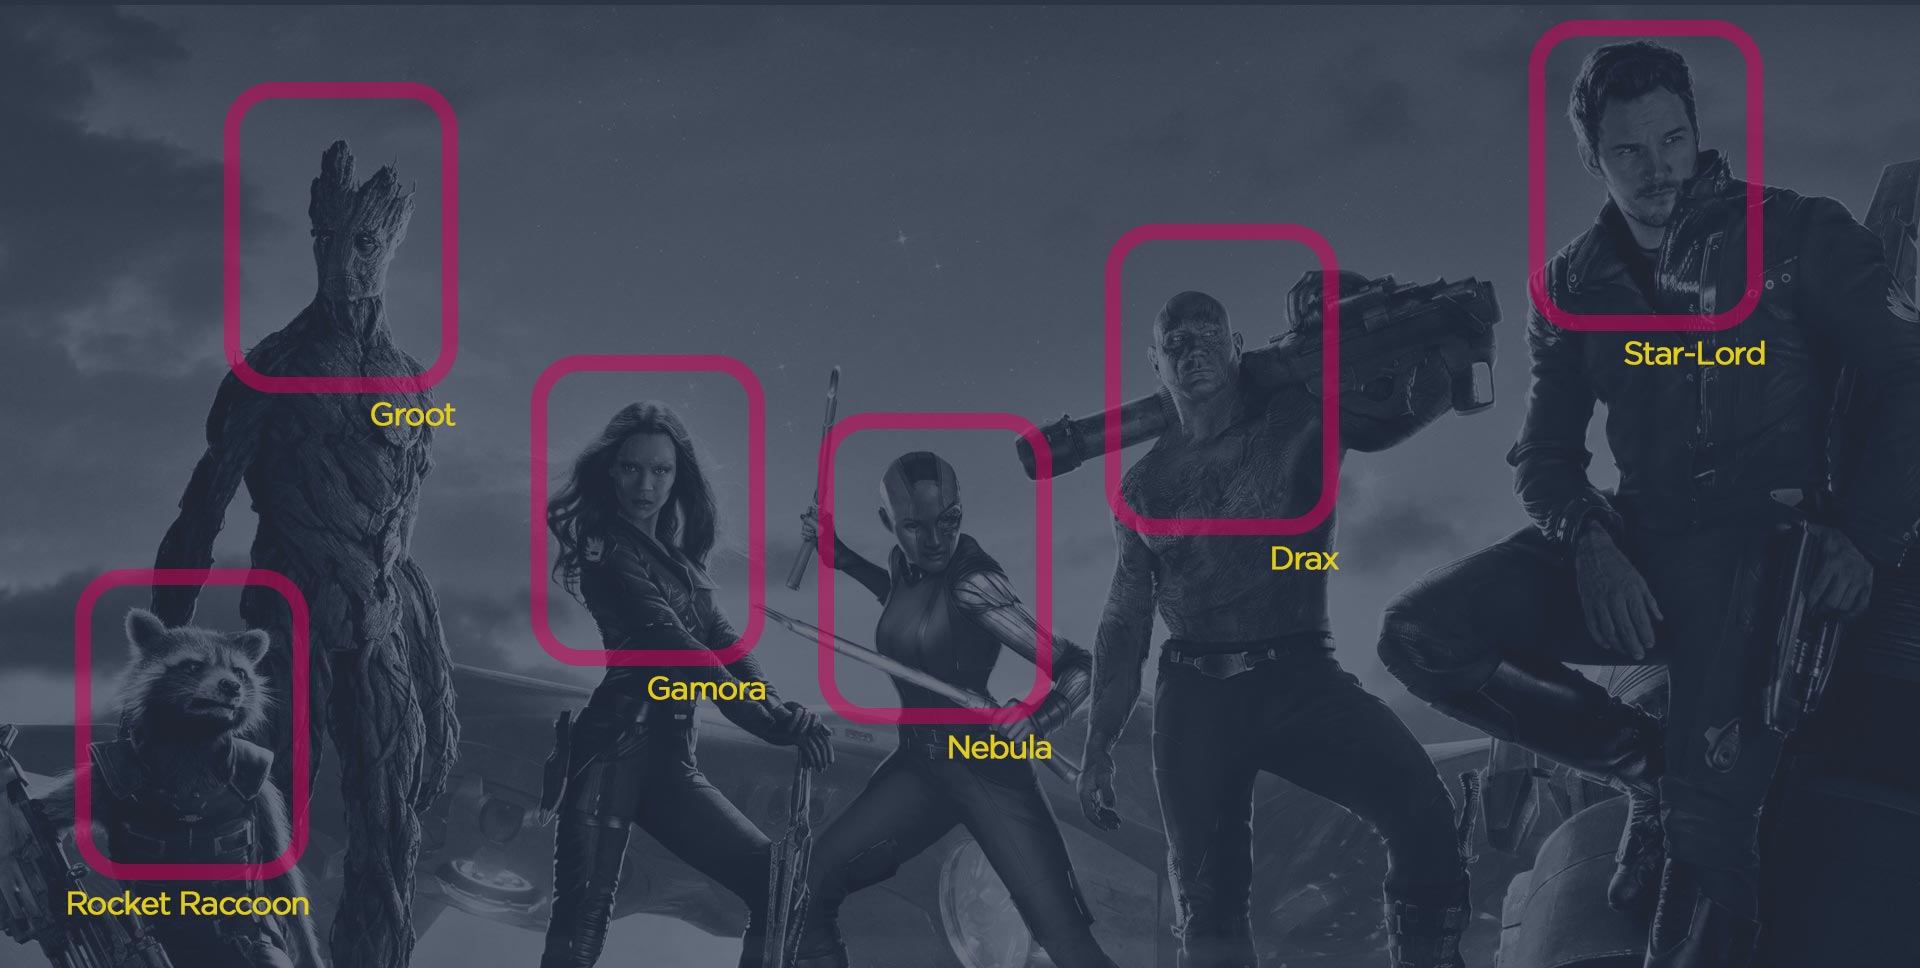 'Guardians of the Galaxy: Vol II' movie characters, with their names overlaid